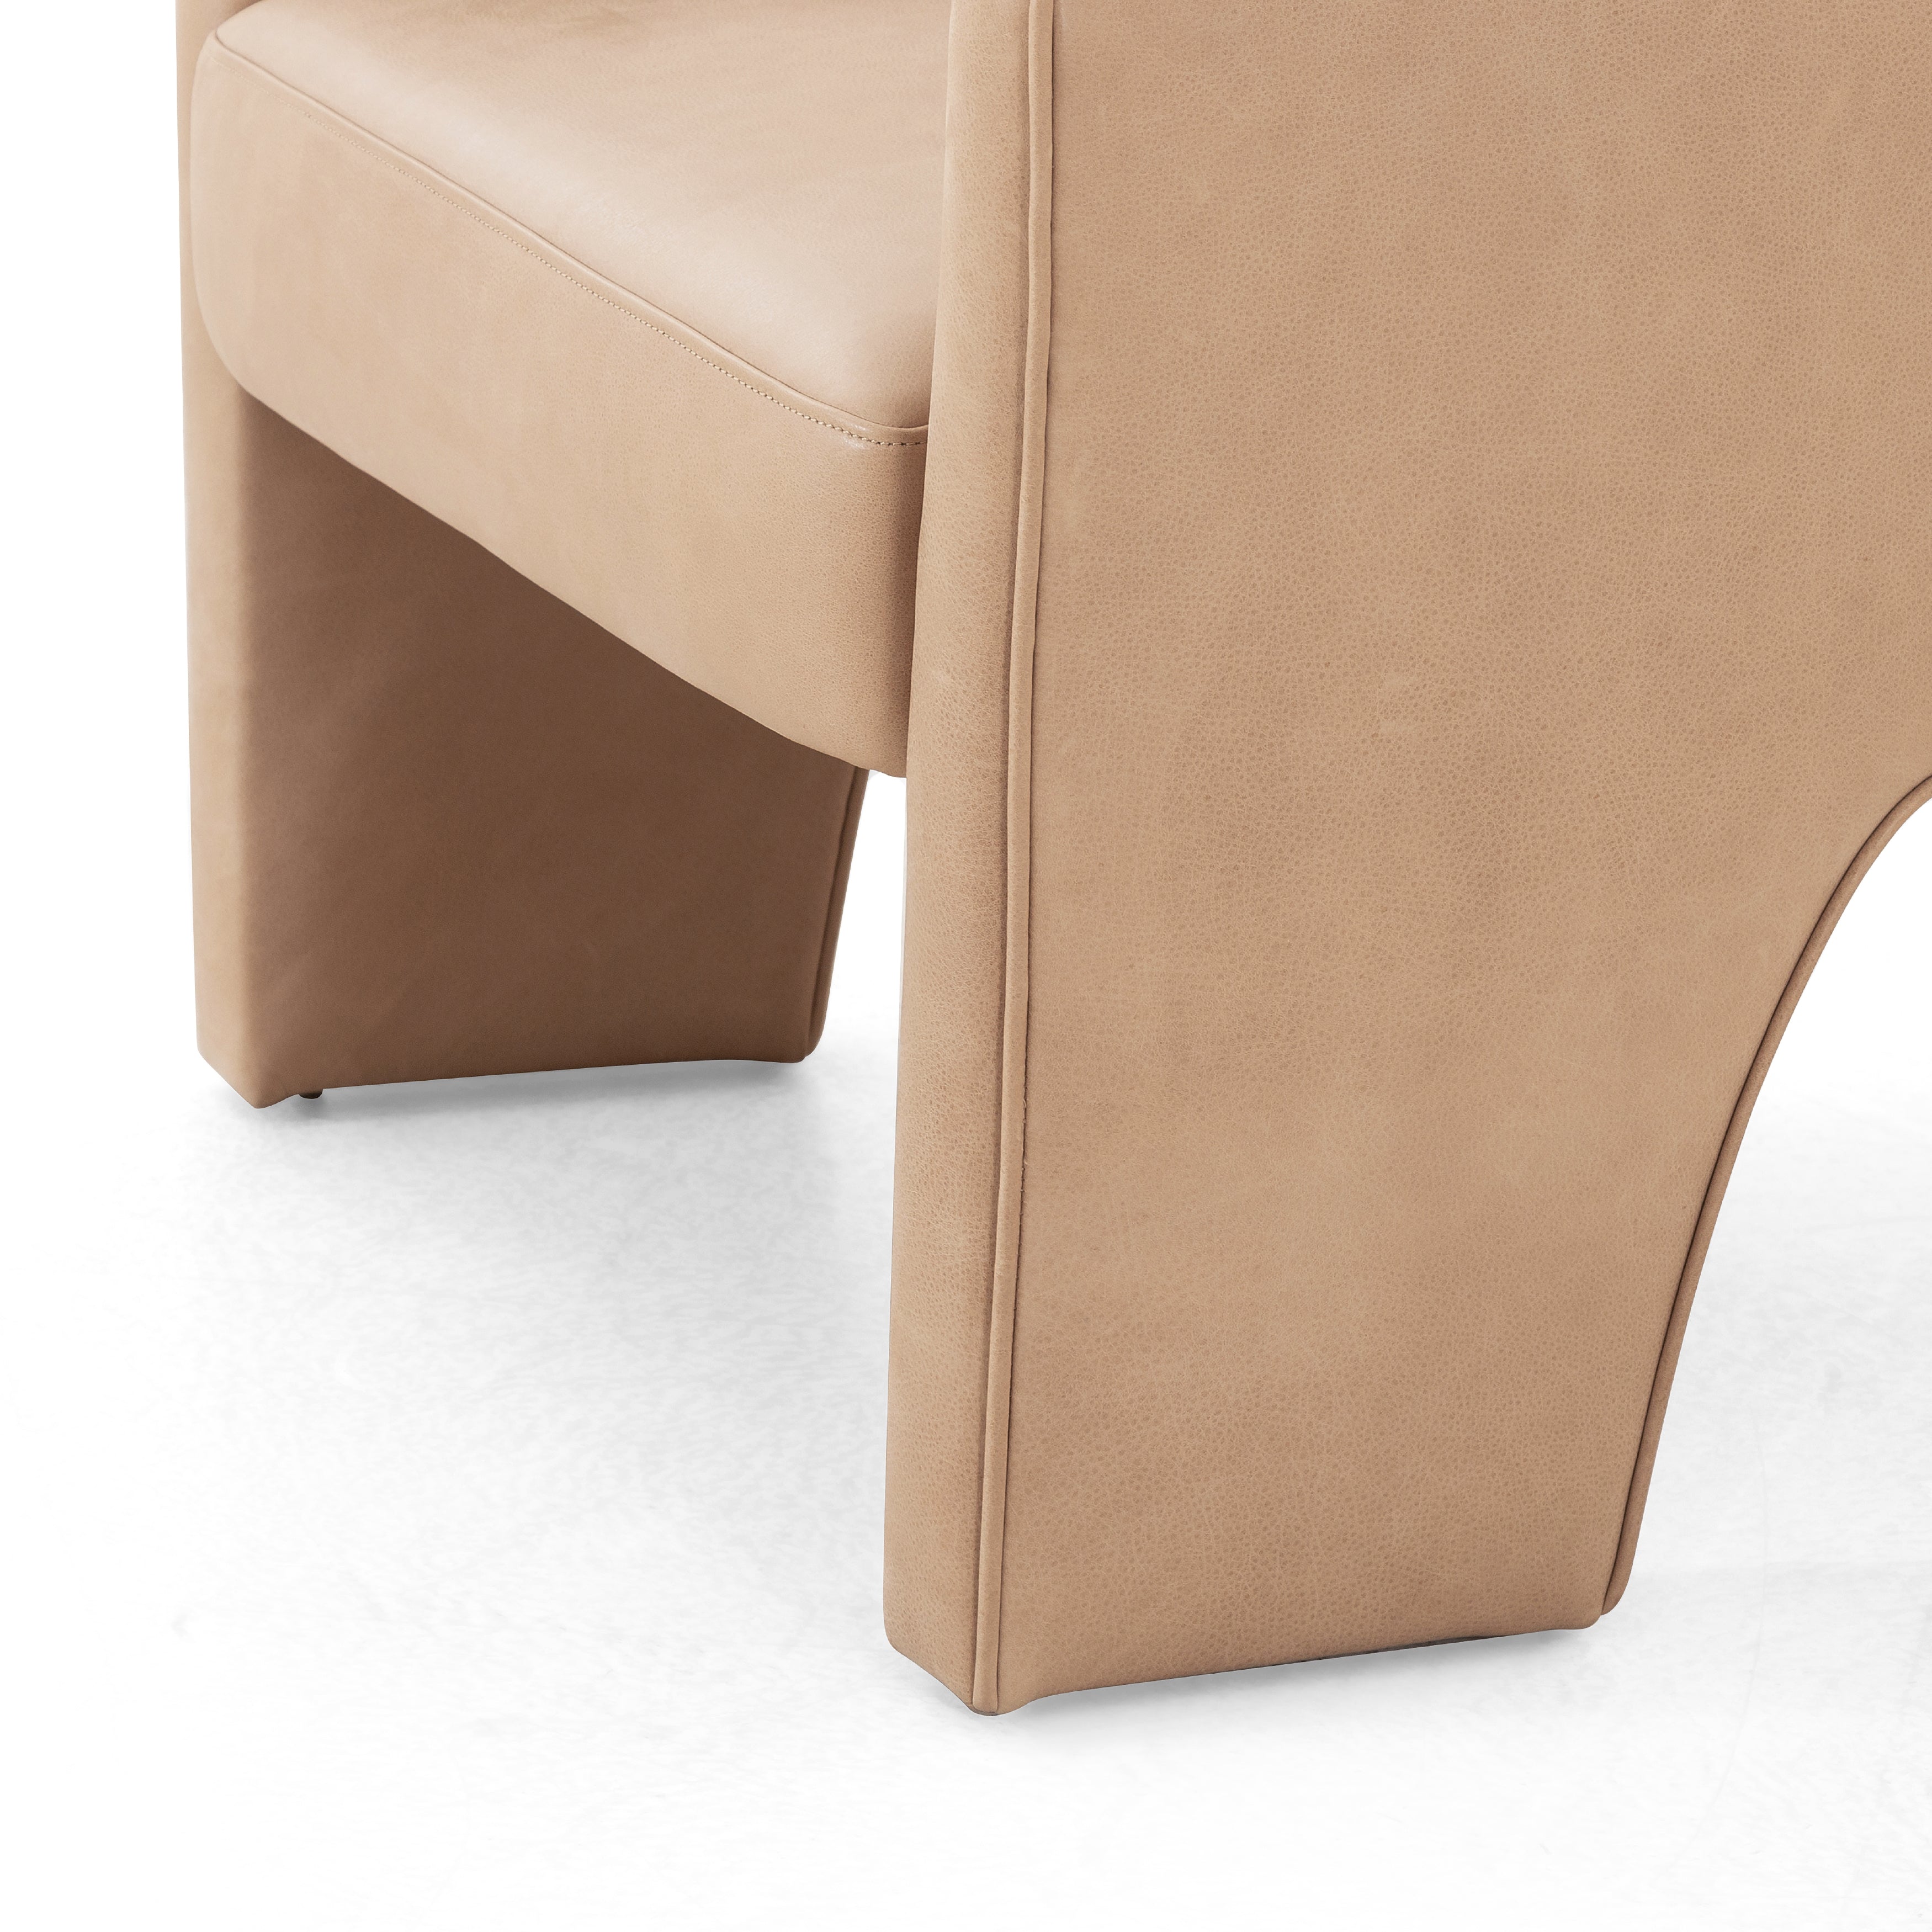 This Fae Chair - Pallermo Nude is well-tailored and stylistically unique. The top grain leather lends a high-fashion feel to a cleverly constructed three-legged design.  Overall Dimensions: 30.25"w x 29.50"d x 29.50"h